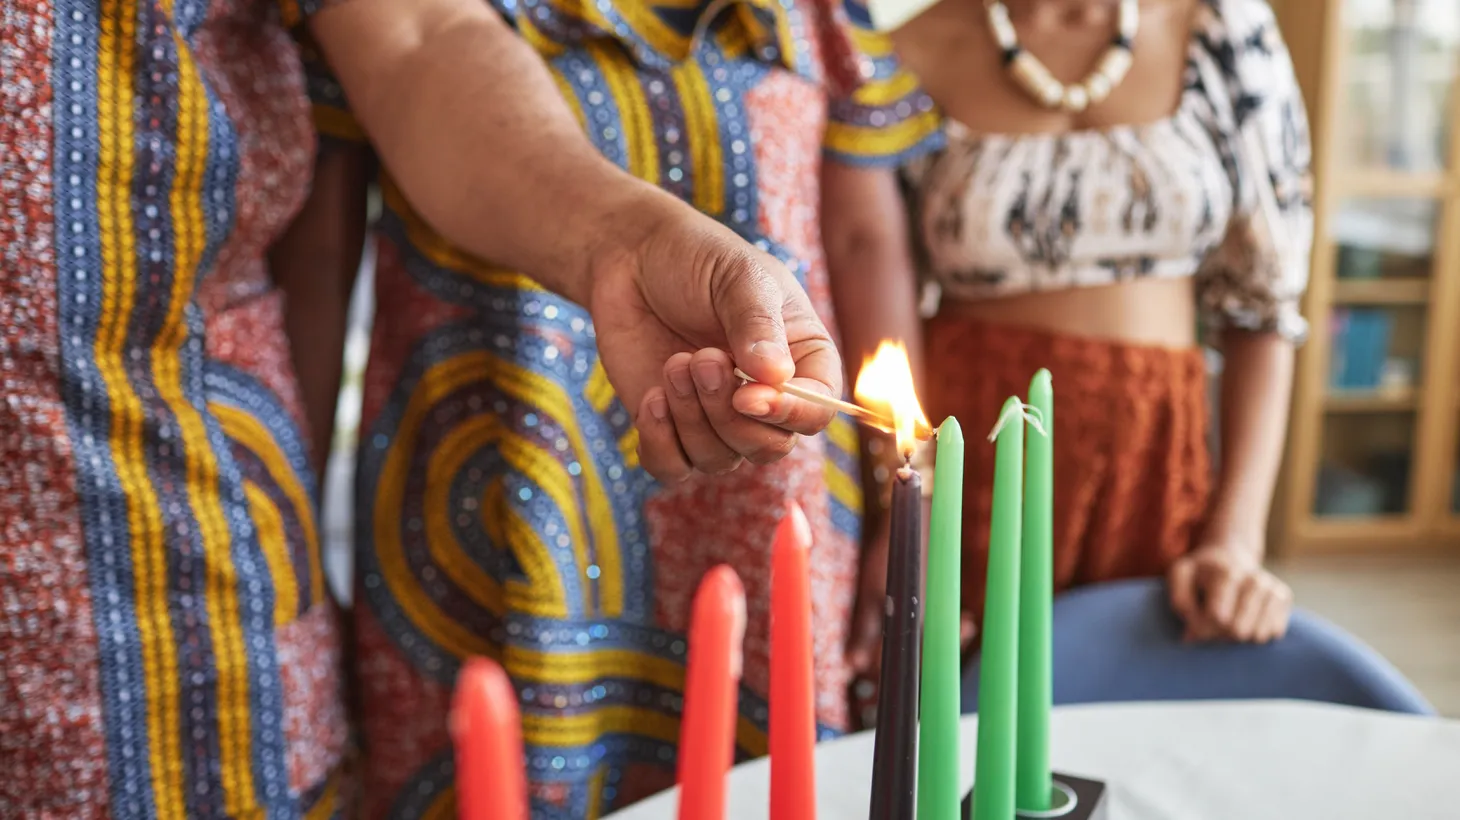 A family burns seven candles for Kwanzaa.